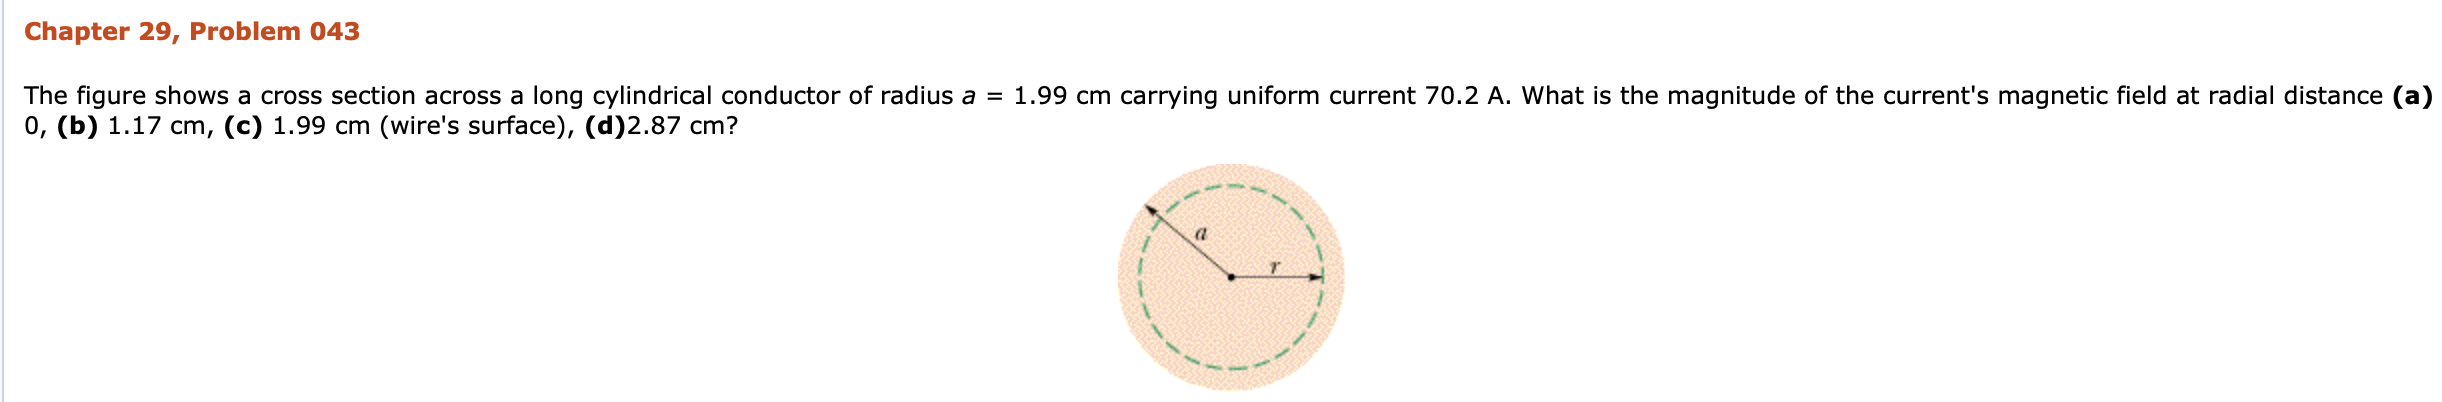 Chapter 29, Problem 043
The figure shows a cross section across a long cylindrical conductor of radius a = 1.99 cm carrying uniform current 70.2 A. What is the magnitude of the current's magnetic field at radial distance (a)
0, (b) 1.17 cm, (c) 1.99 cm (wire's surface), (d)2.87 cm?
